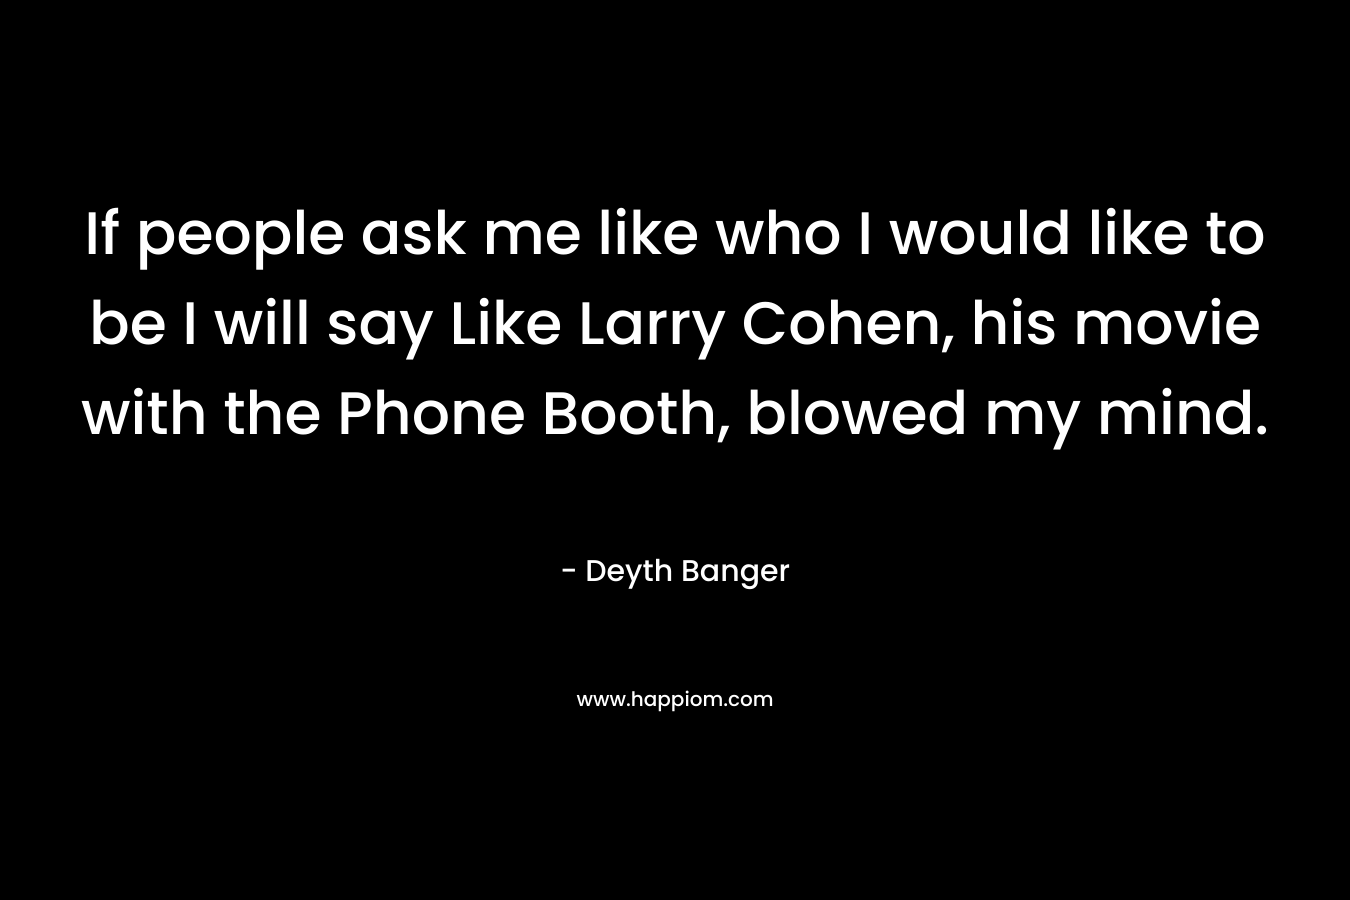 If people ask me like who I would like to be I will say Like Larry Cohen, his movie with the Phone Booth, blowed my mind. – Deyth Banger